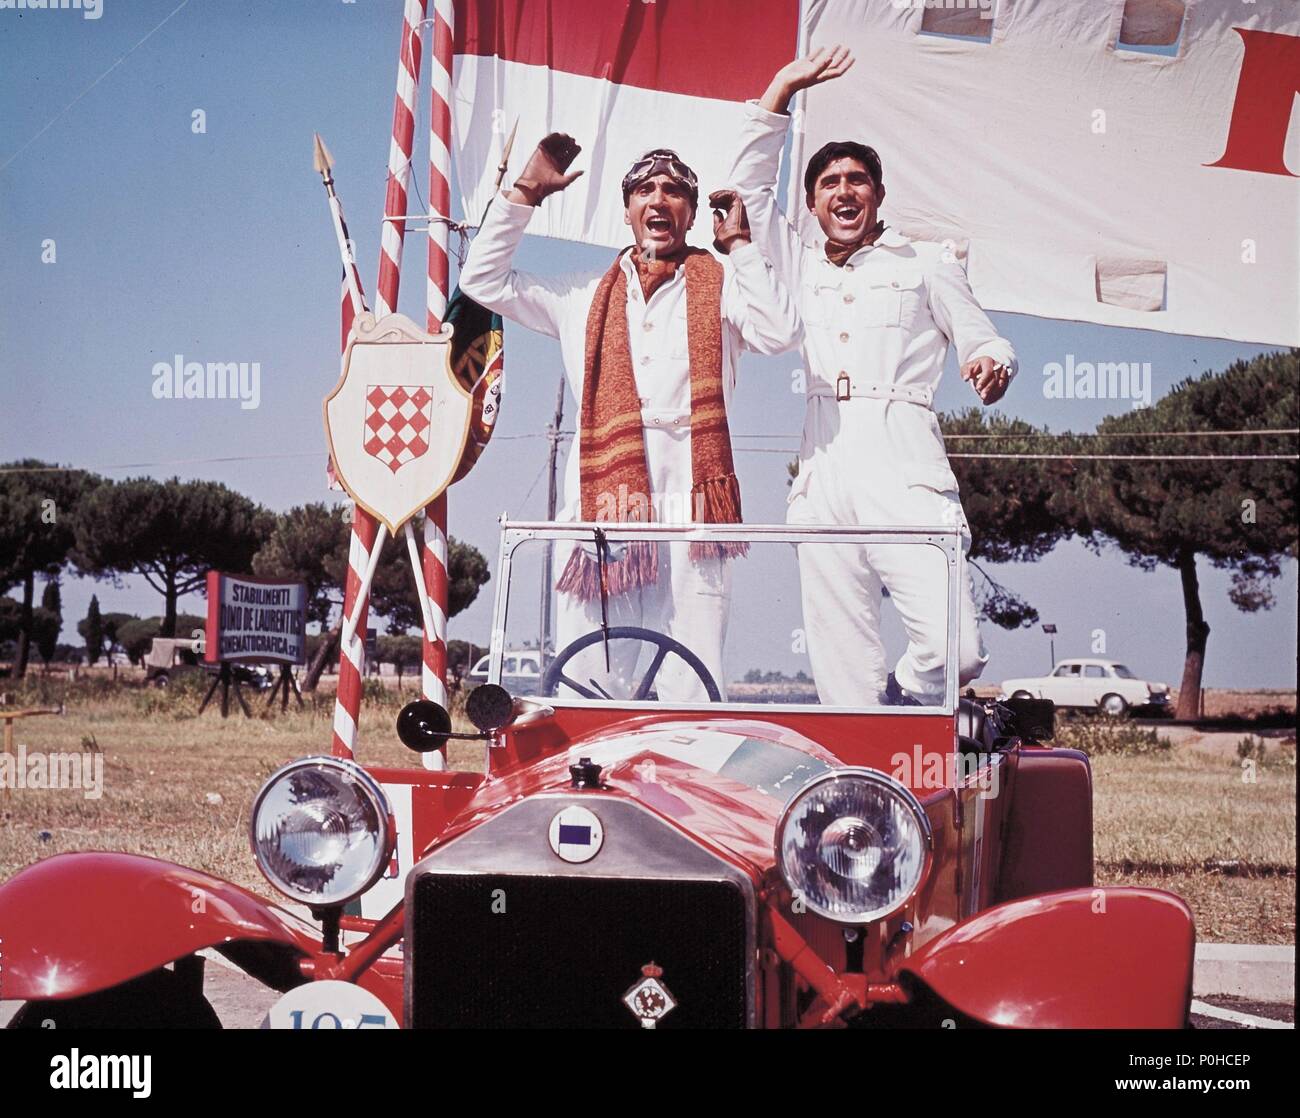 Original Film Title: MONTE CARLO OR BUST!.  English Title: MONTE CARLO OR BUST!.  Film Director: KEN ANNAKIN.  Year: 1969. Credit: PARAMOUNT PICTURES / Album Stock Photo